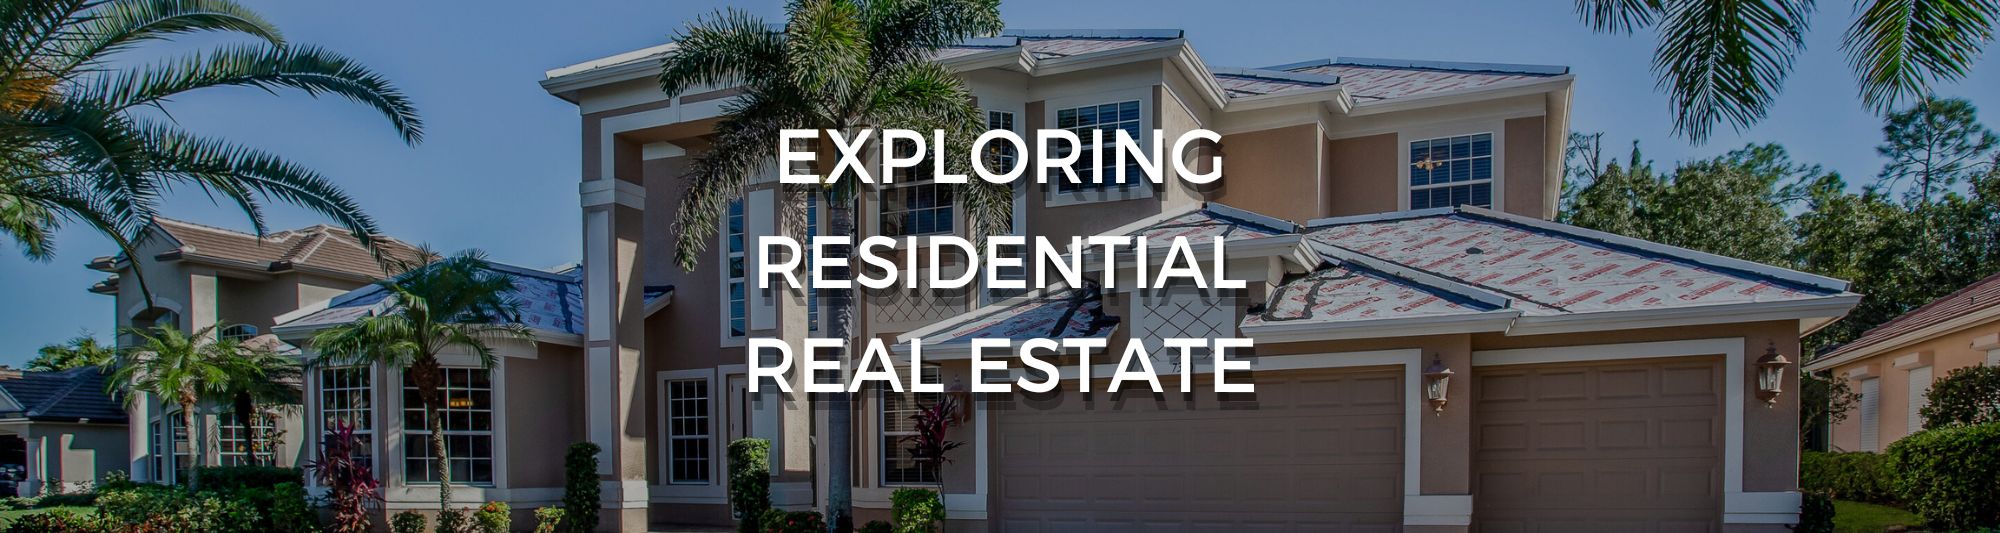 Photo of a residential property with text saying Exploring Residential Real Estate